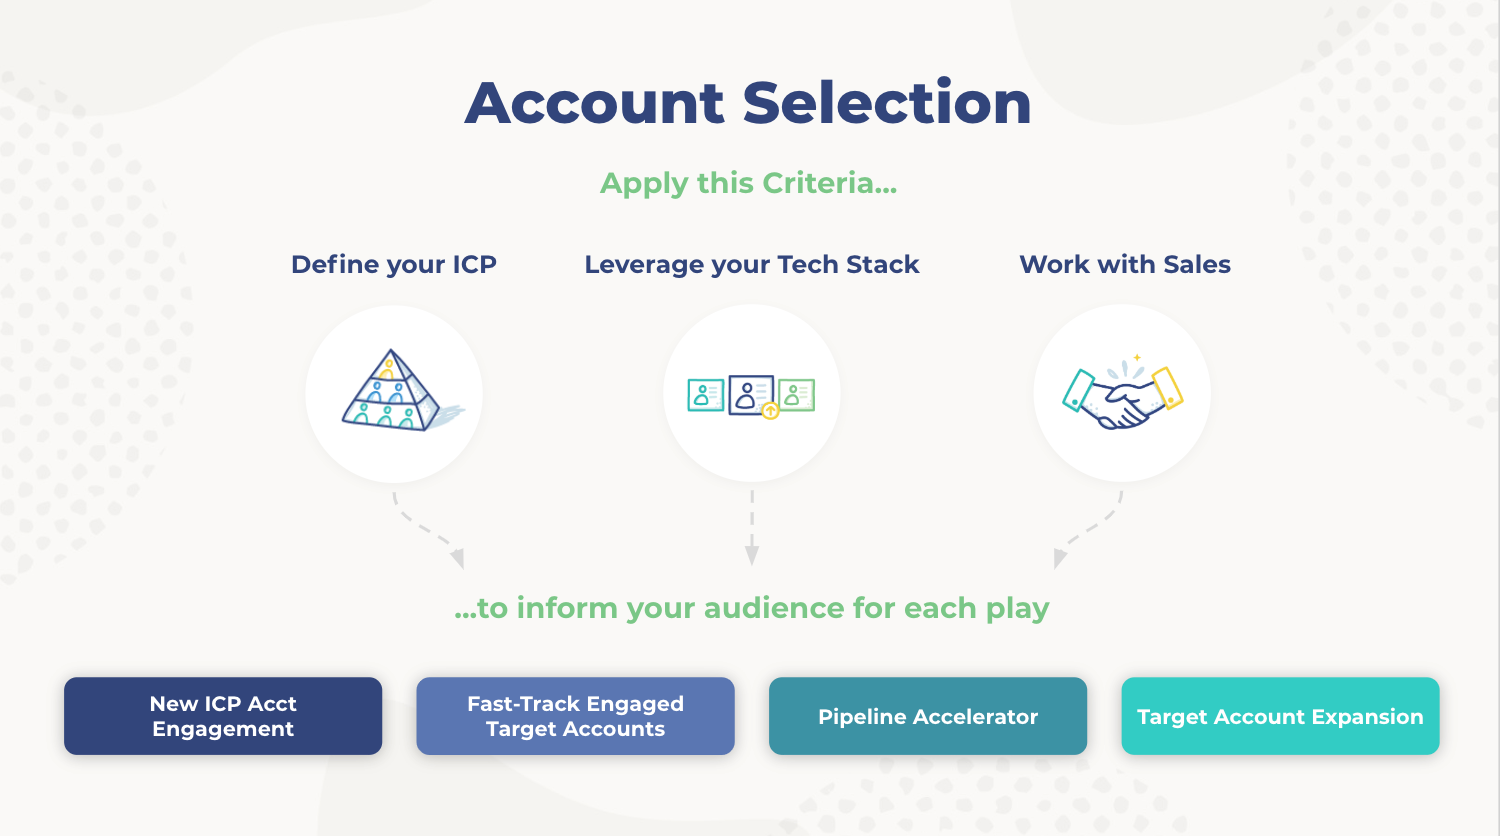 Account Selection in an ABM campaign